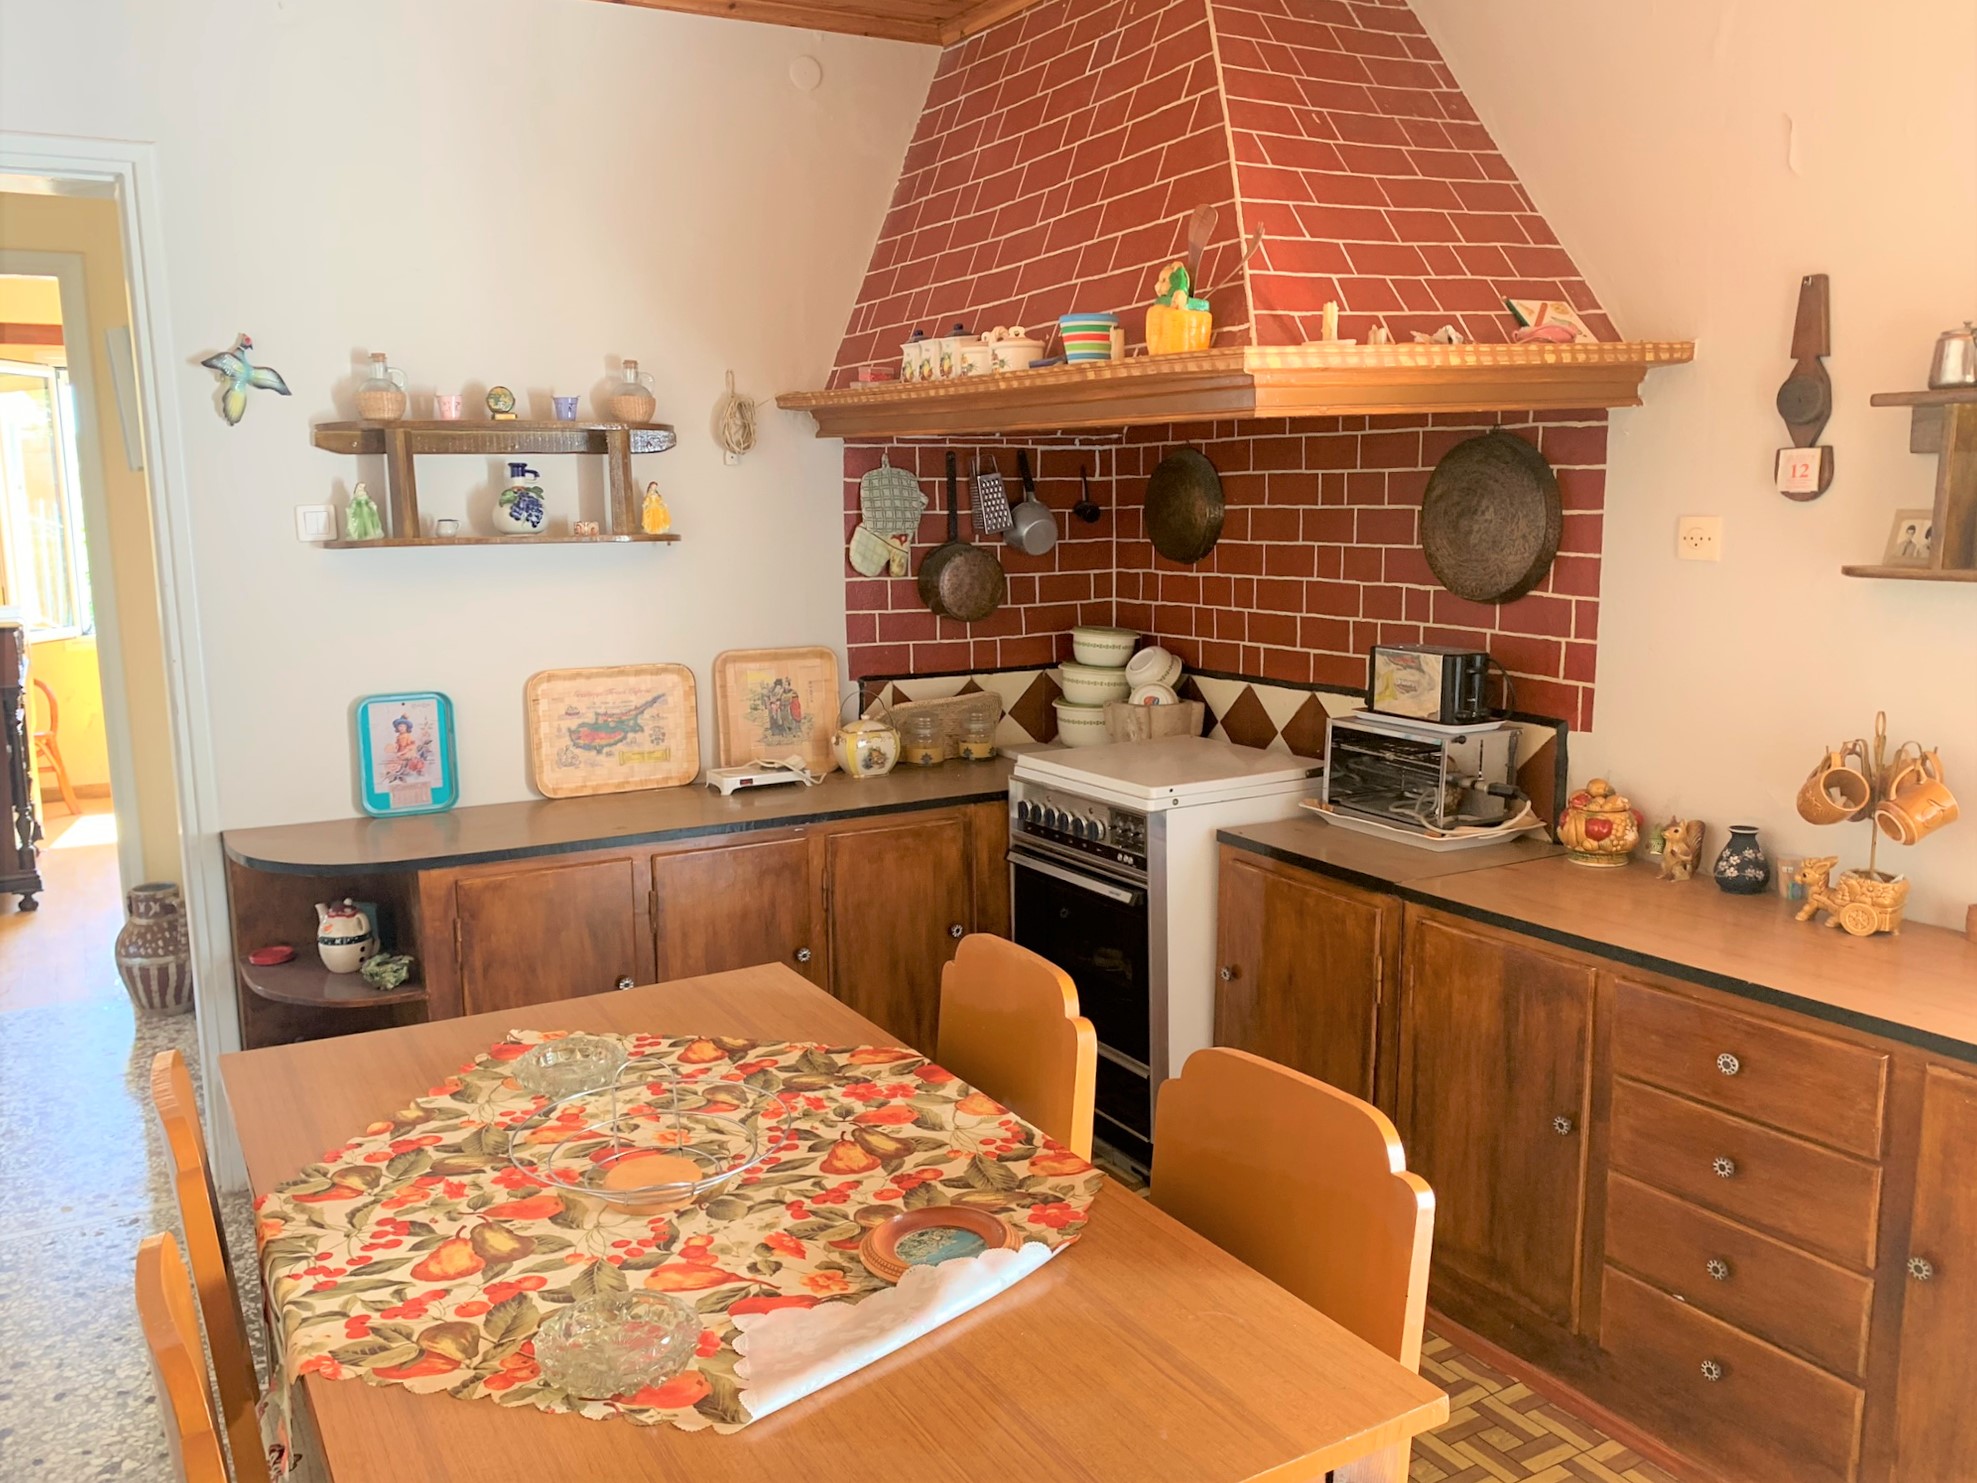 Kitchen area of house for sale on Ithaca Greece, Vathi